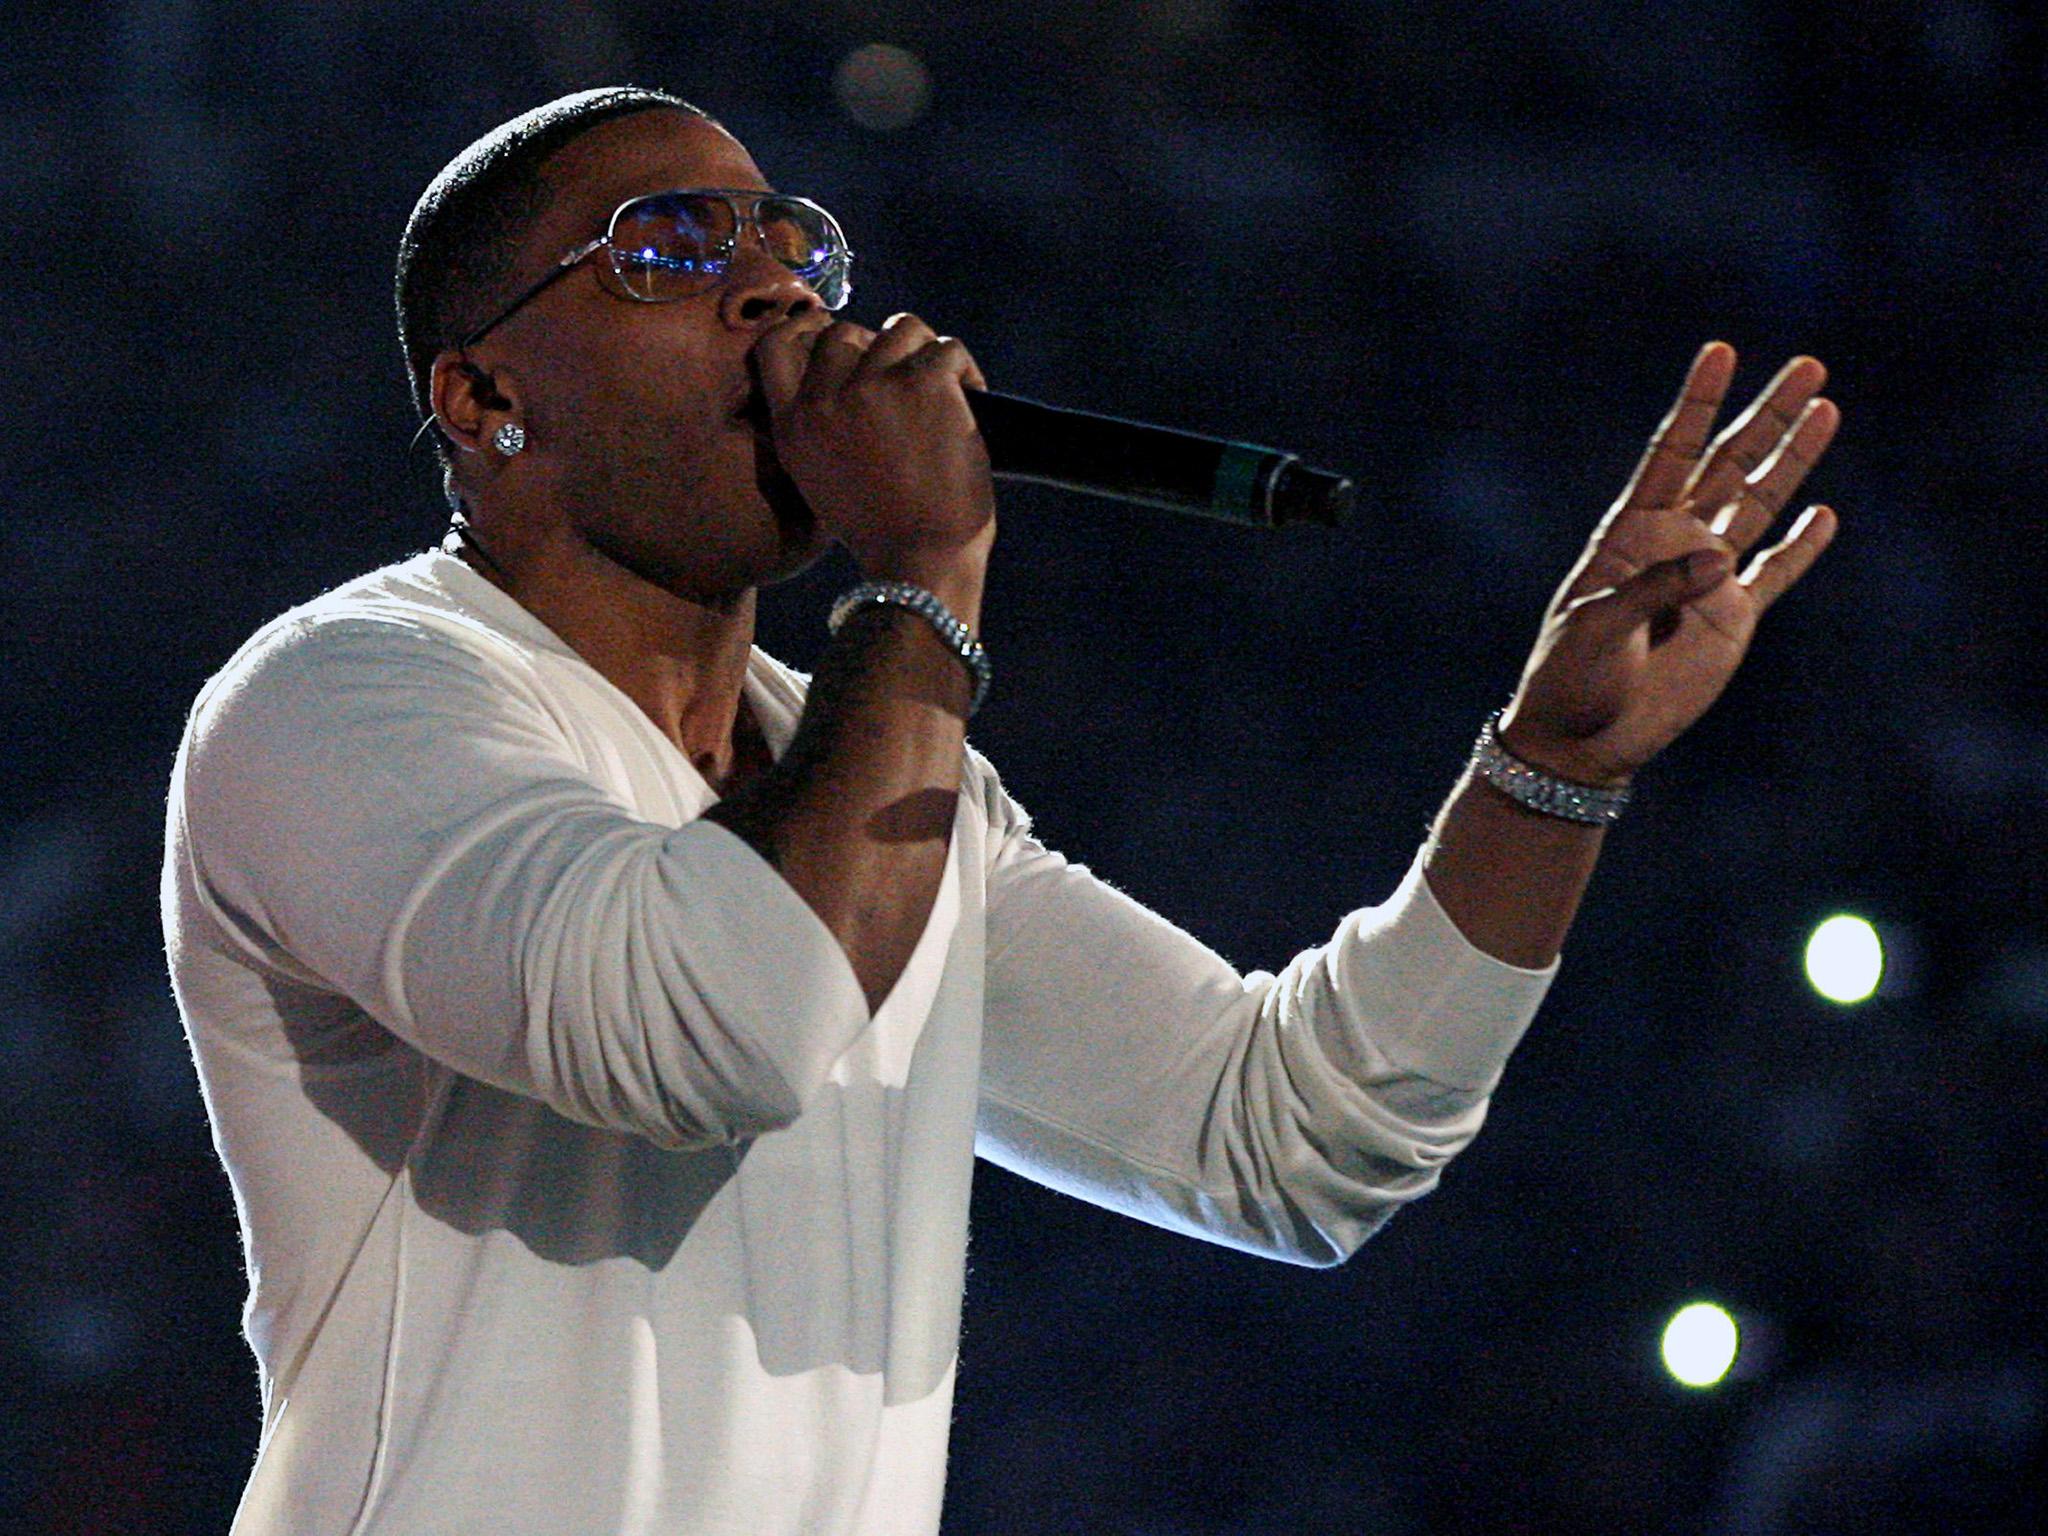 Nelly was released pending further inquiries after his rape arrest